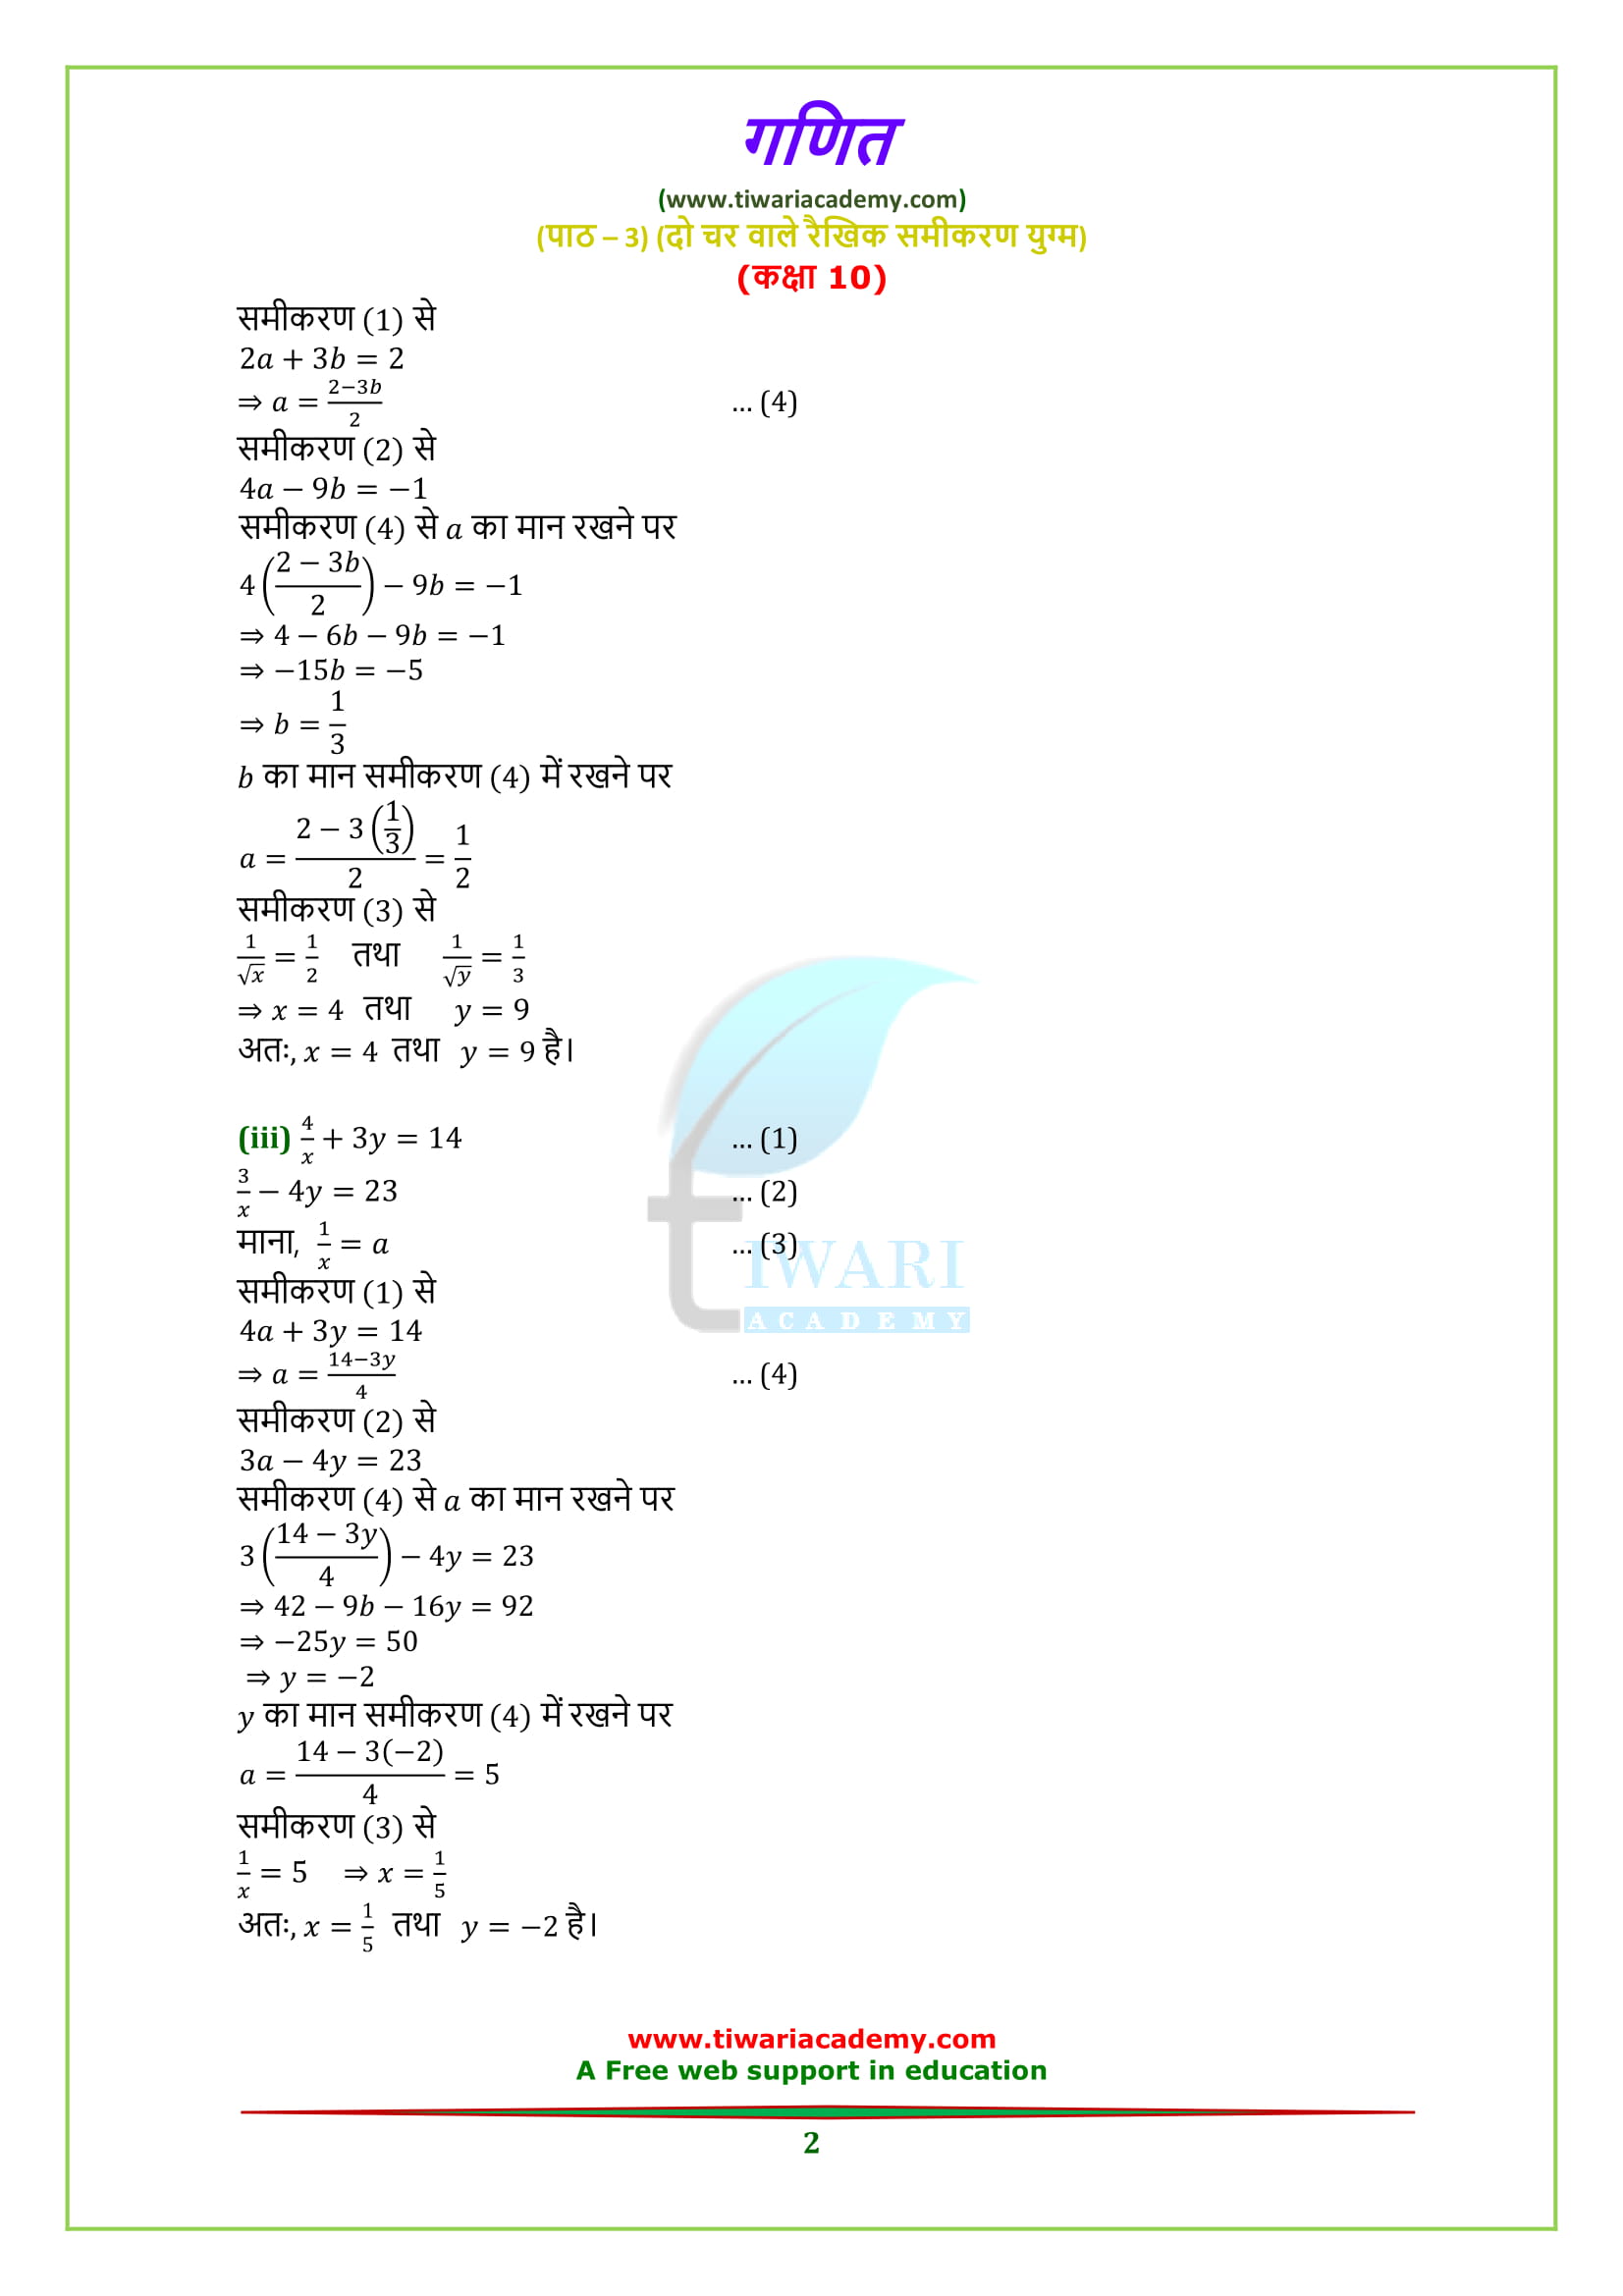 NCERT Solutions for class 10 Maths Chapter 3 Exercise 3.6 in Hindi medium pdf